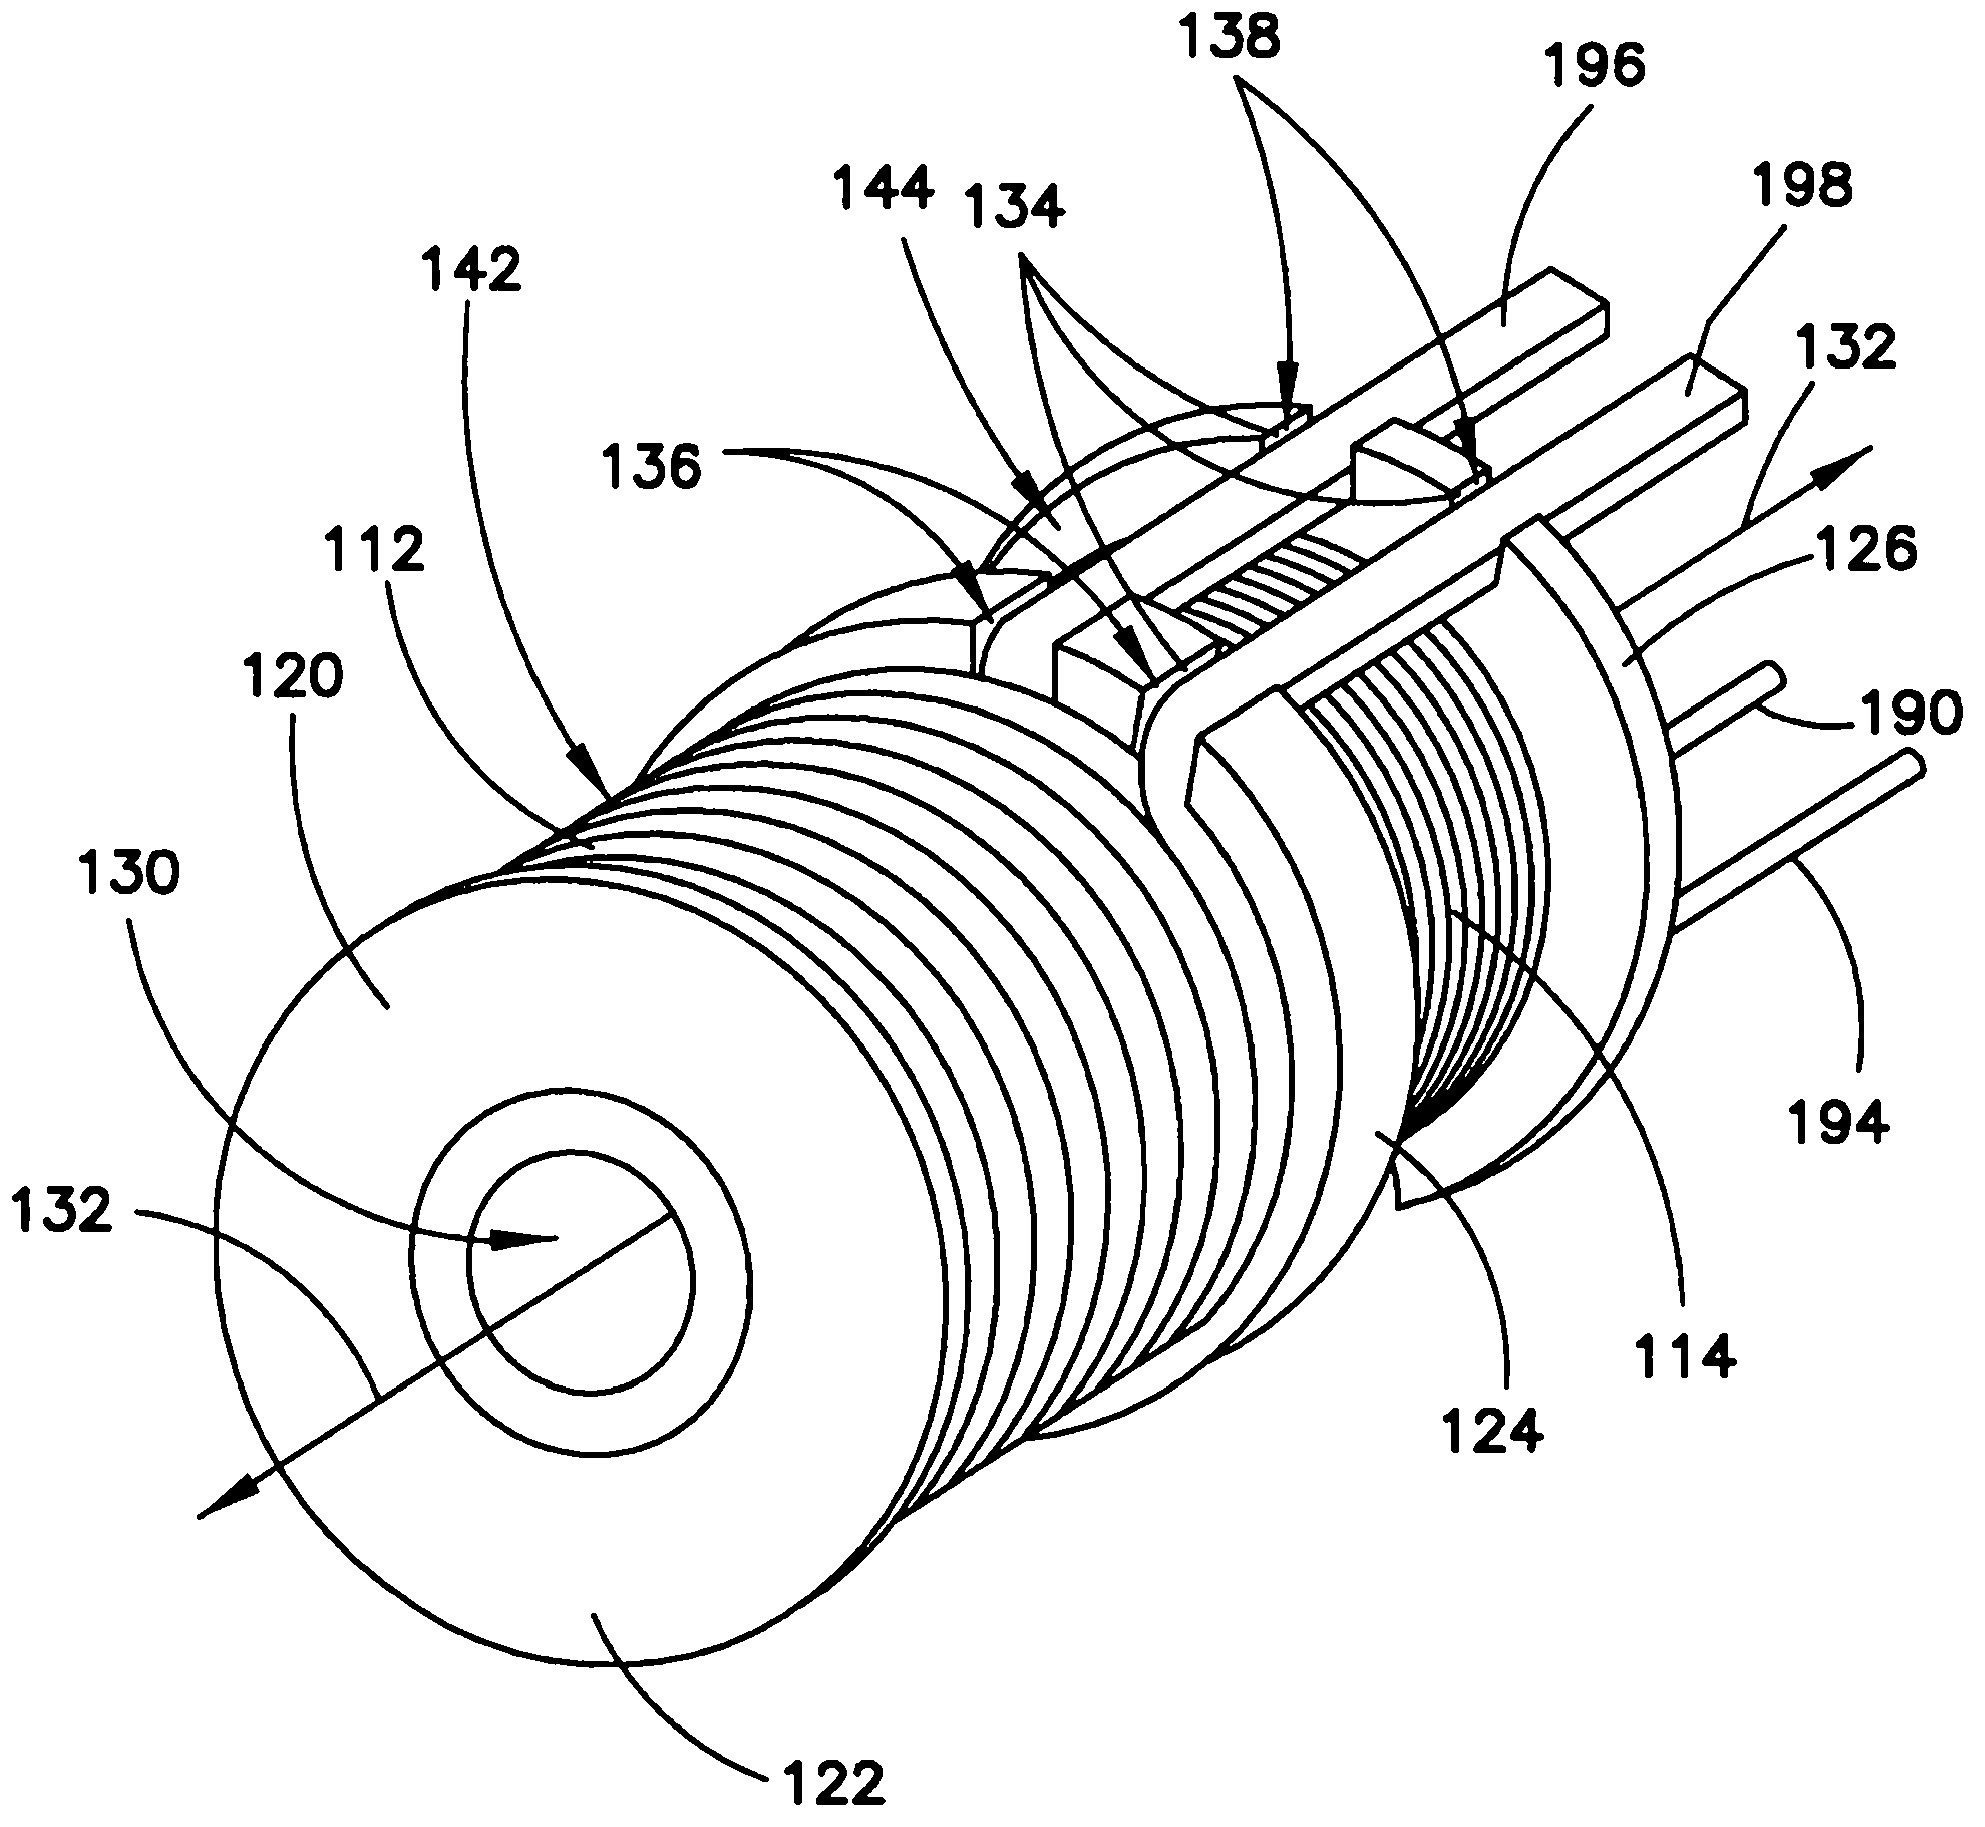 Starter motor solenoid with variable reluctance plunger